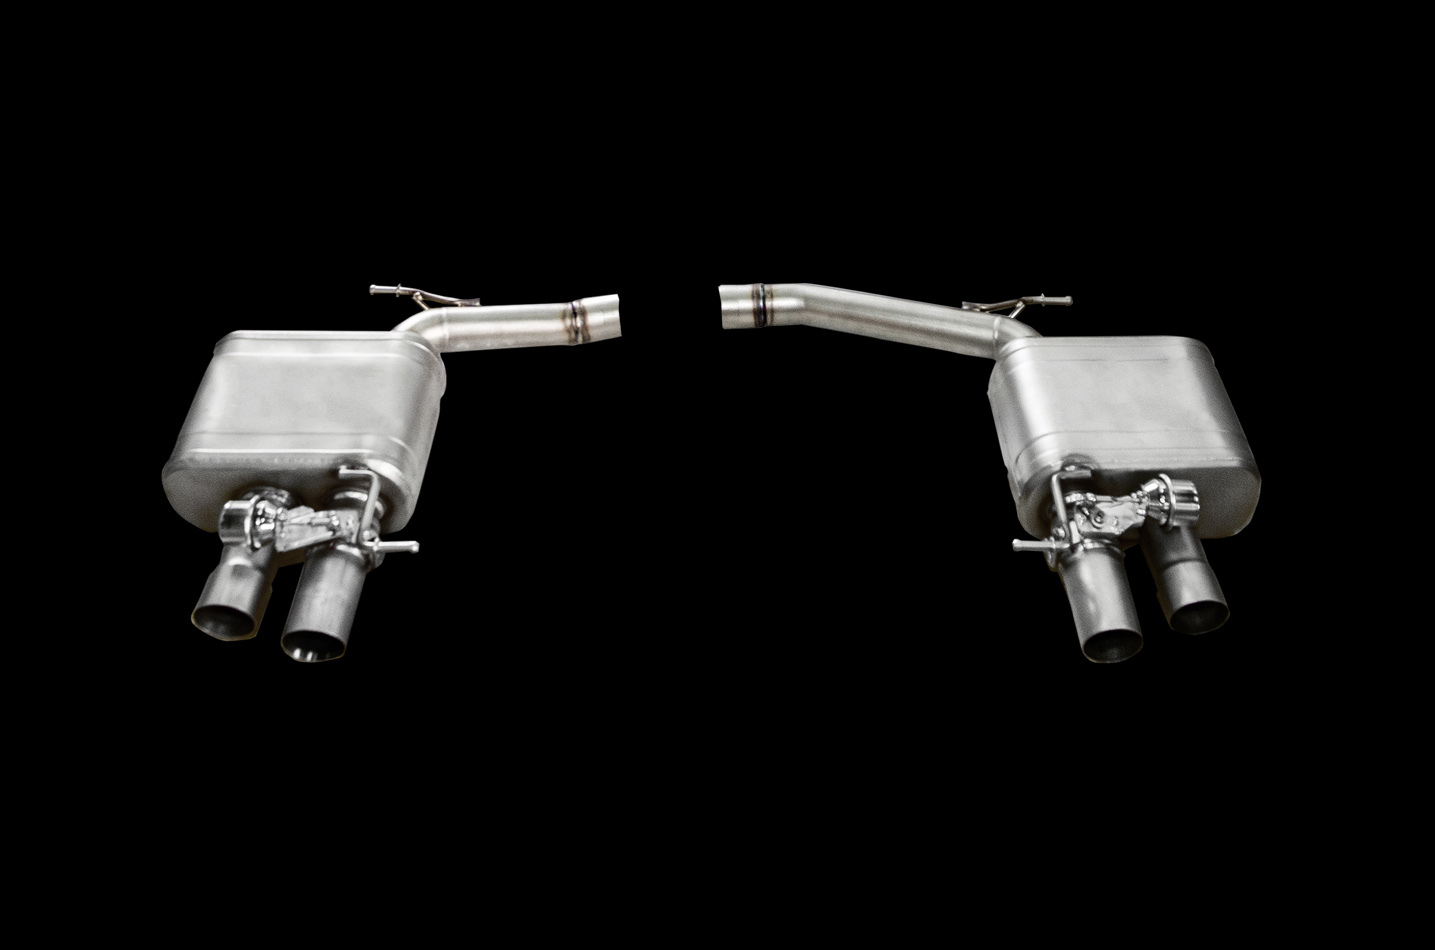 IPE exhaust system for Audi A6 / A7 55 TFSI (C8)